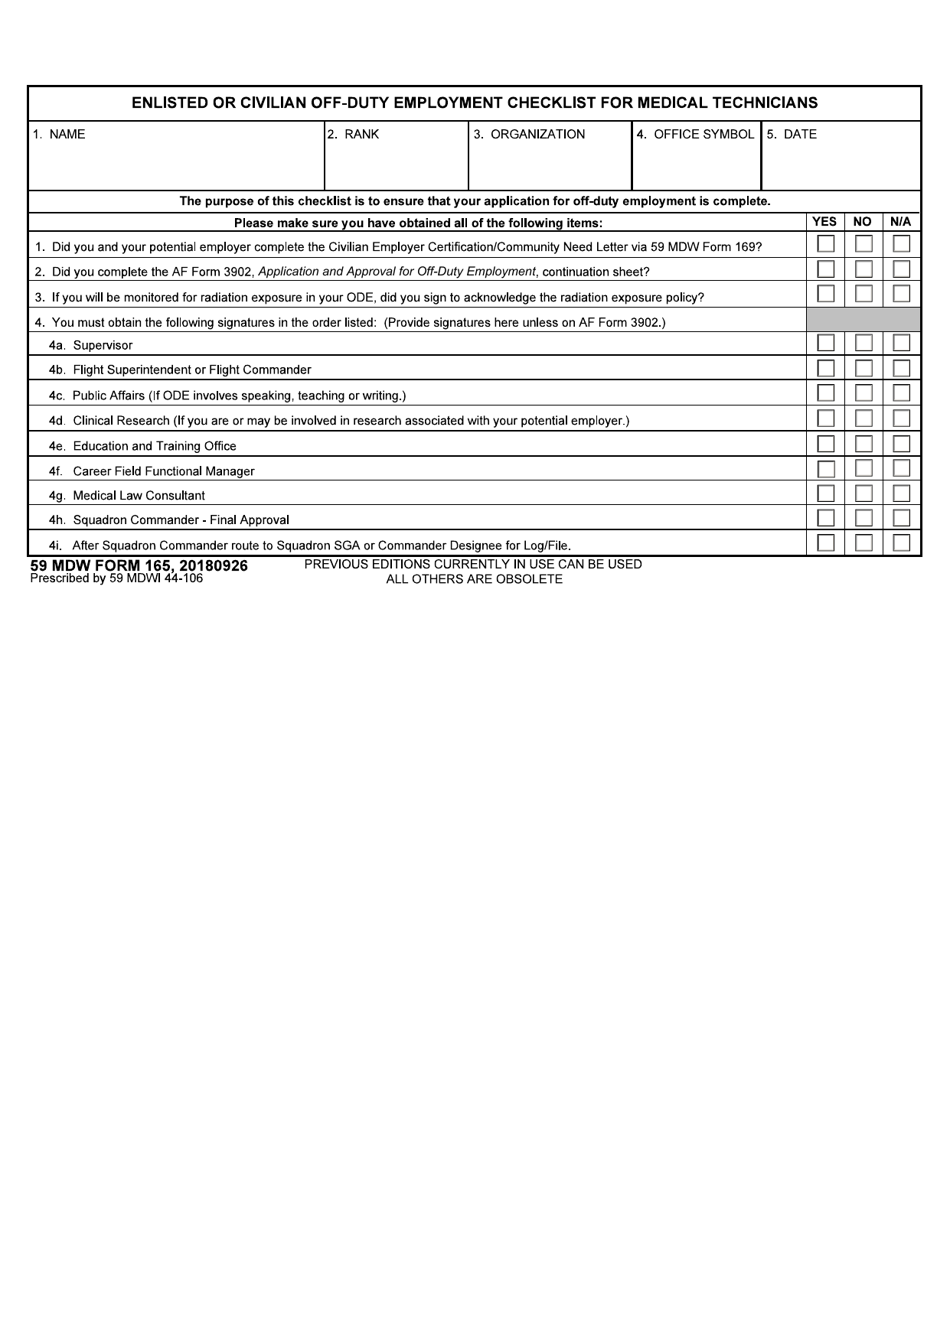 59 MDW Form 165 Enlisted or Civilian off-Duty Employment Checklist for Medical Technicians, Page 1